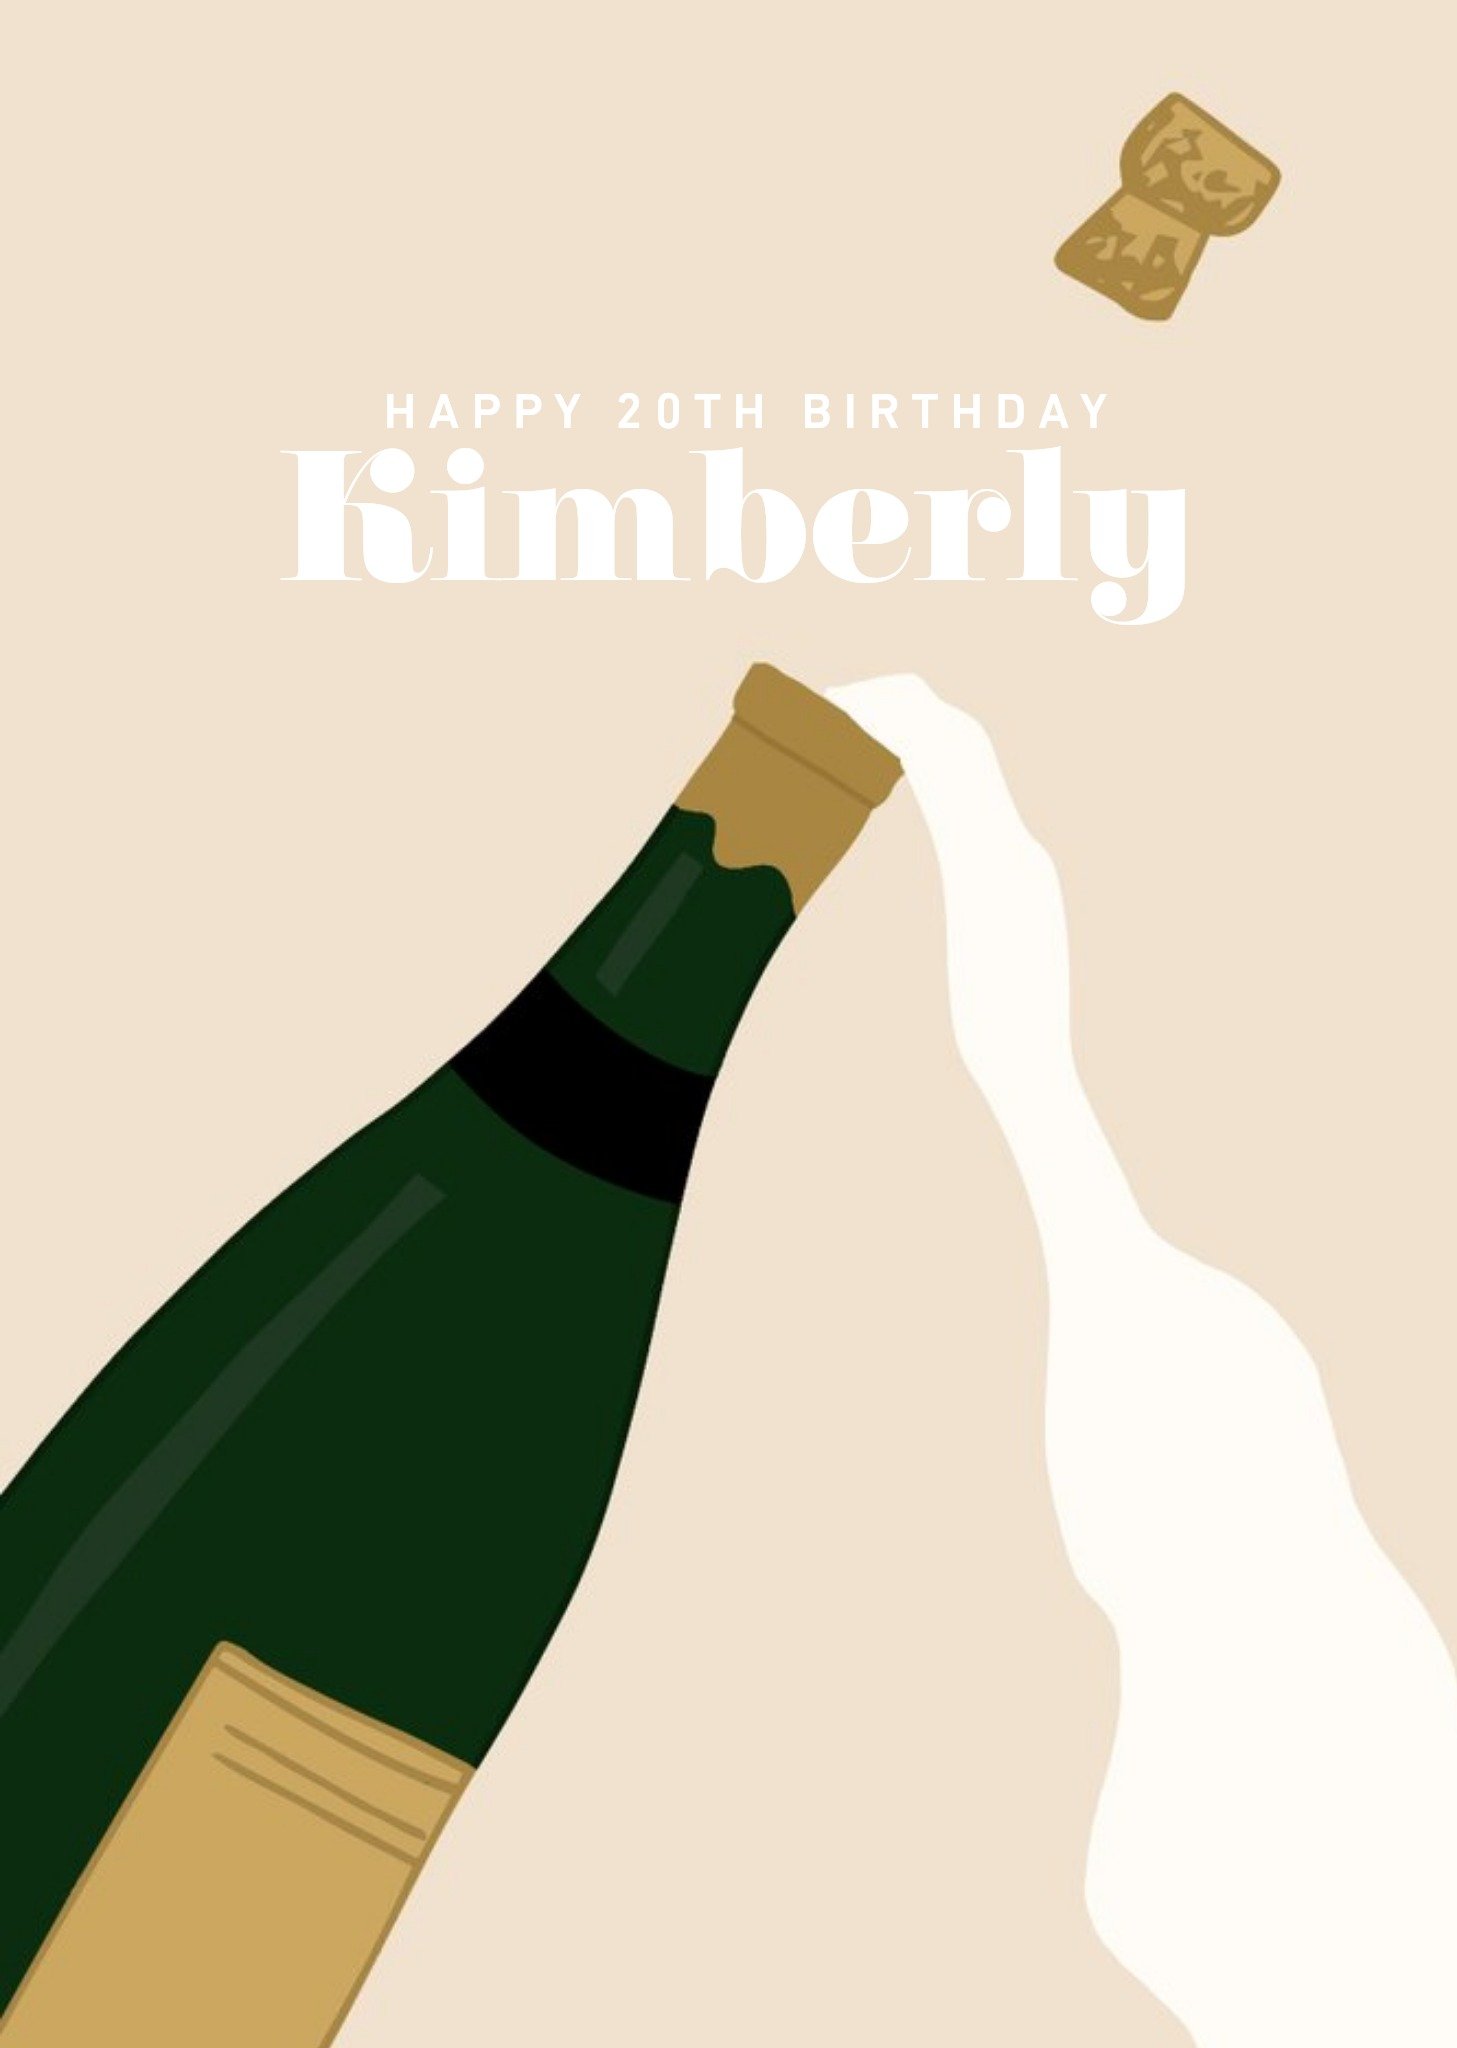 Moonpig Pearl And Ivy Illustrated Champagne Bottle Customisable Birthday Card Ecard